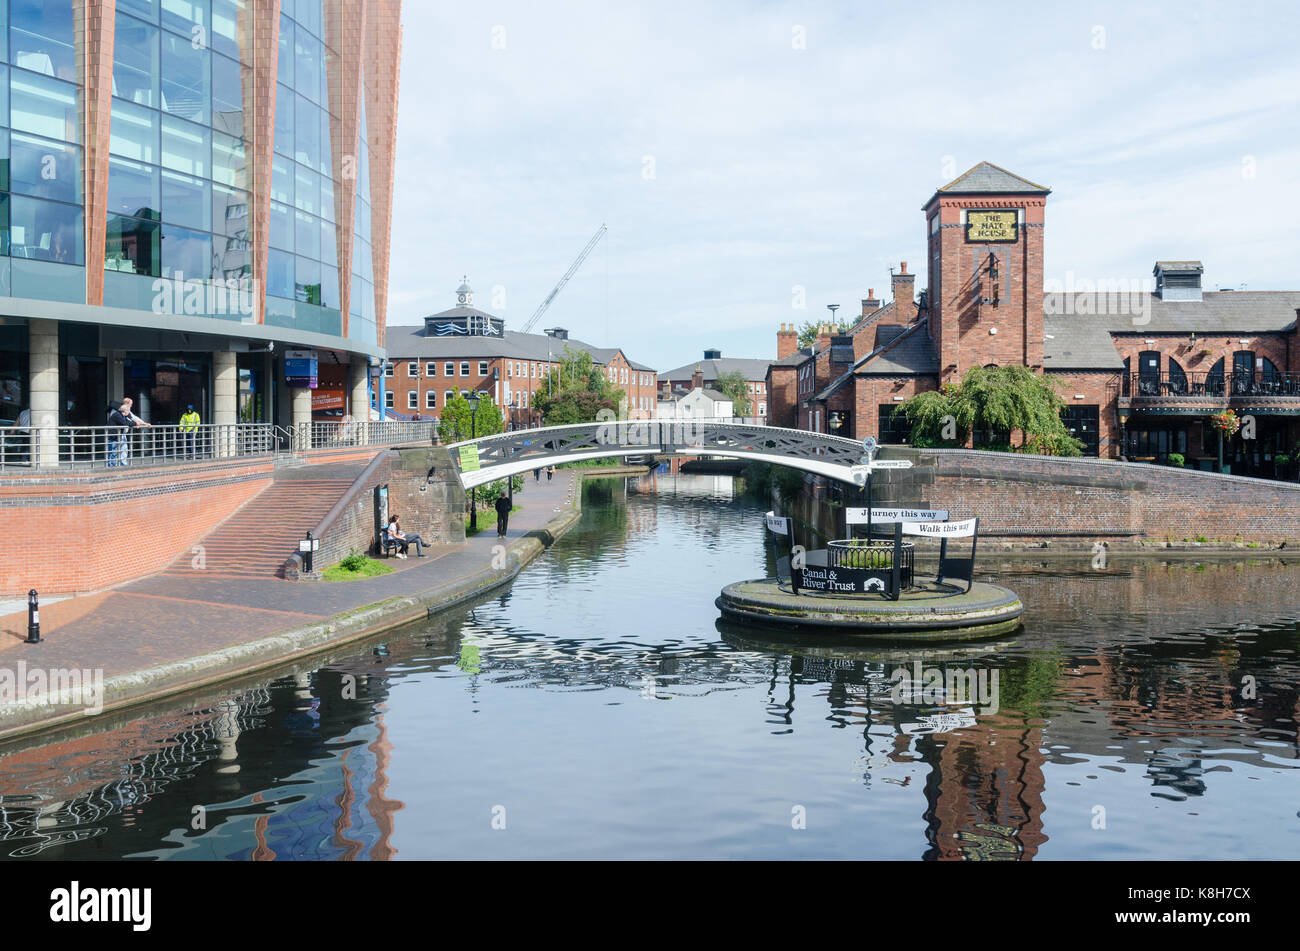 The Malt House canal side pub in Brindley Place, Birmingham Stock Photo